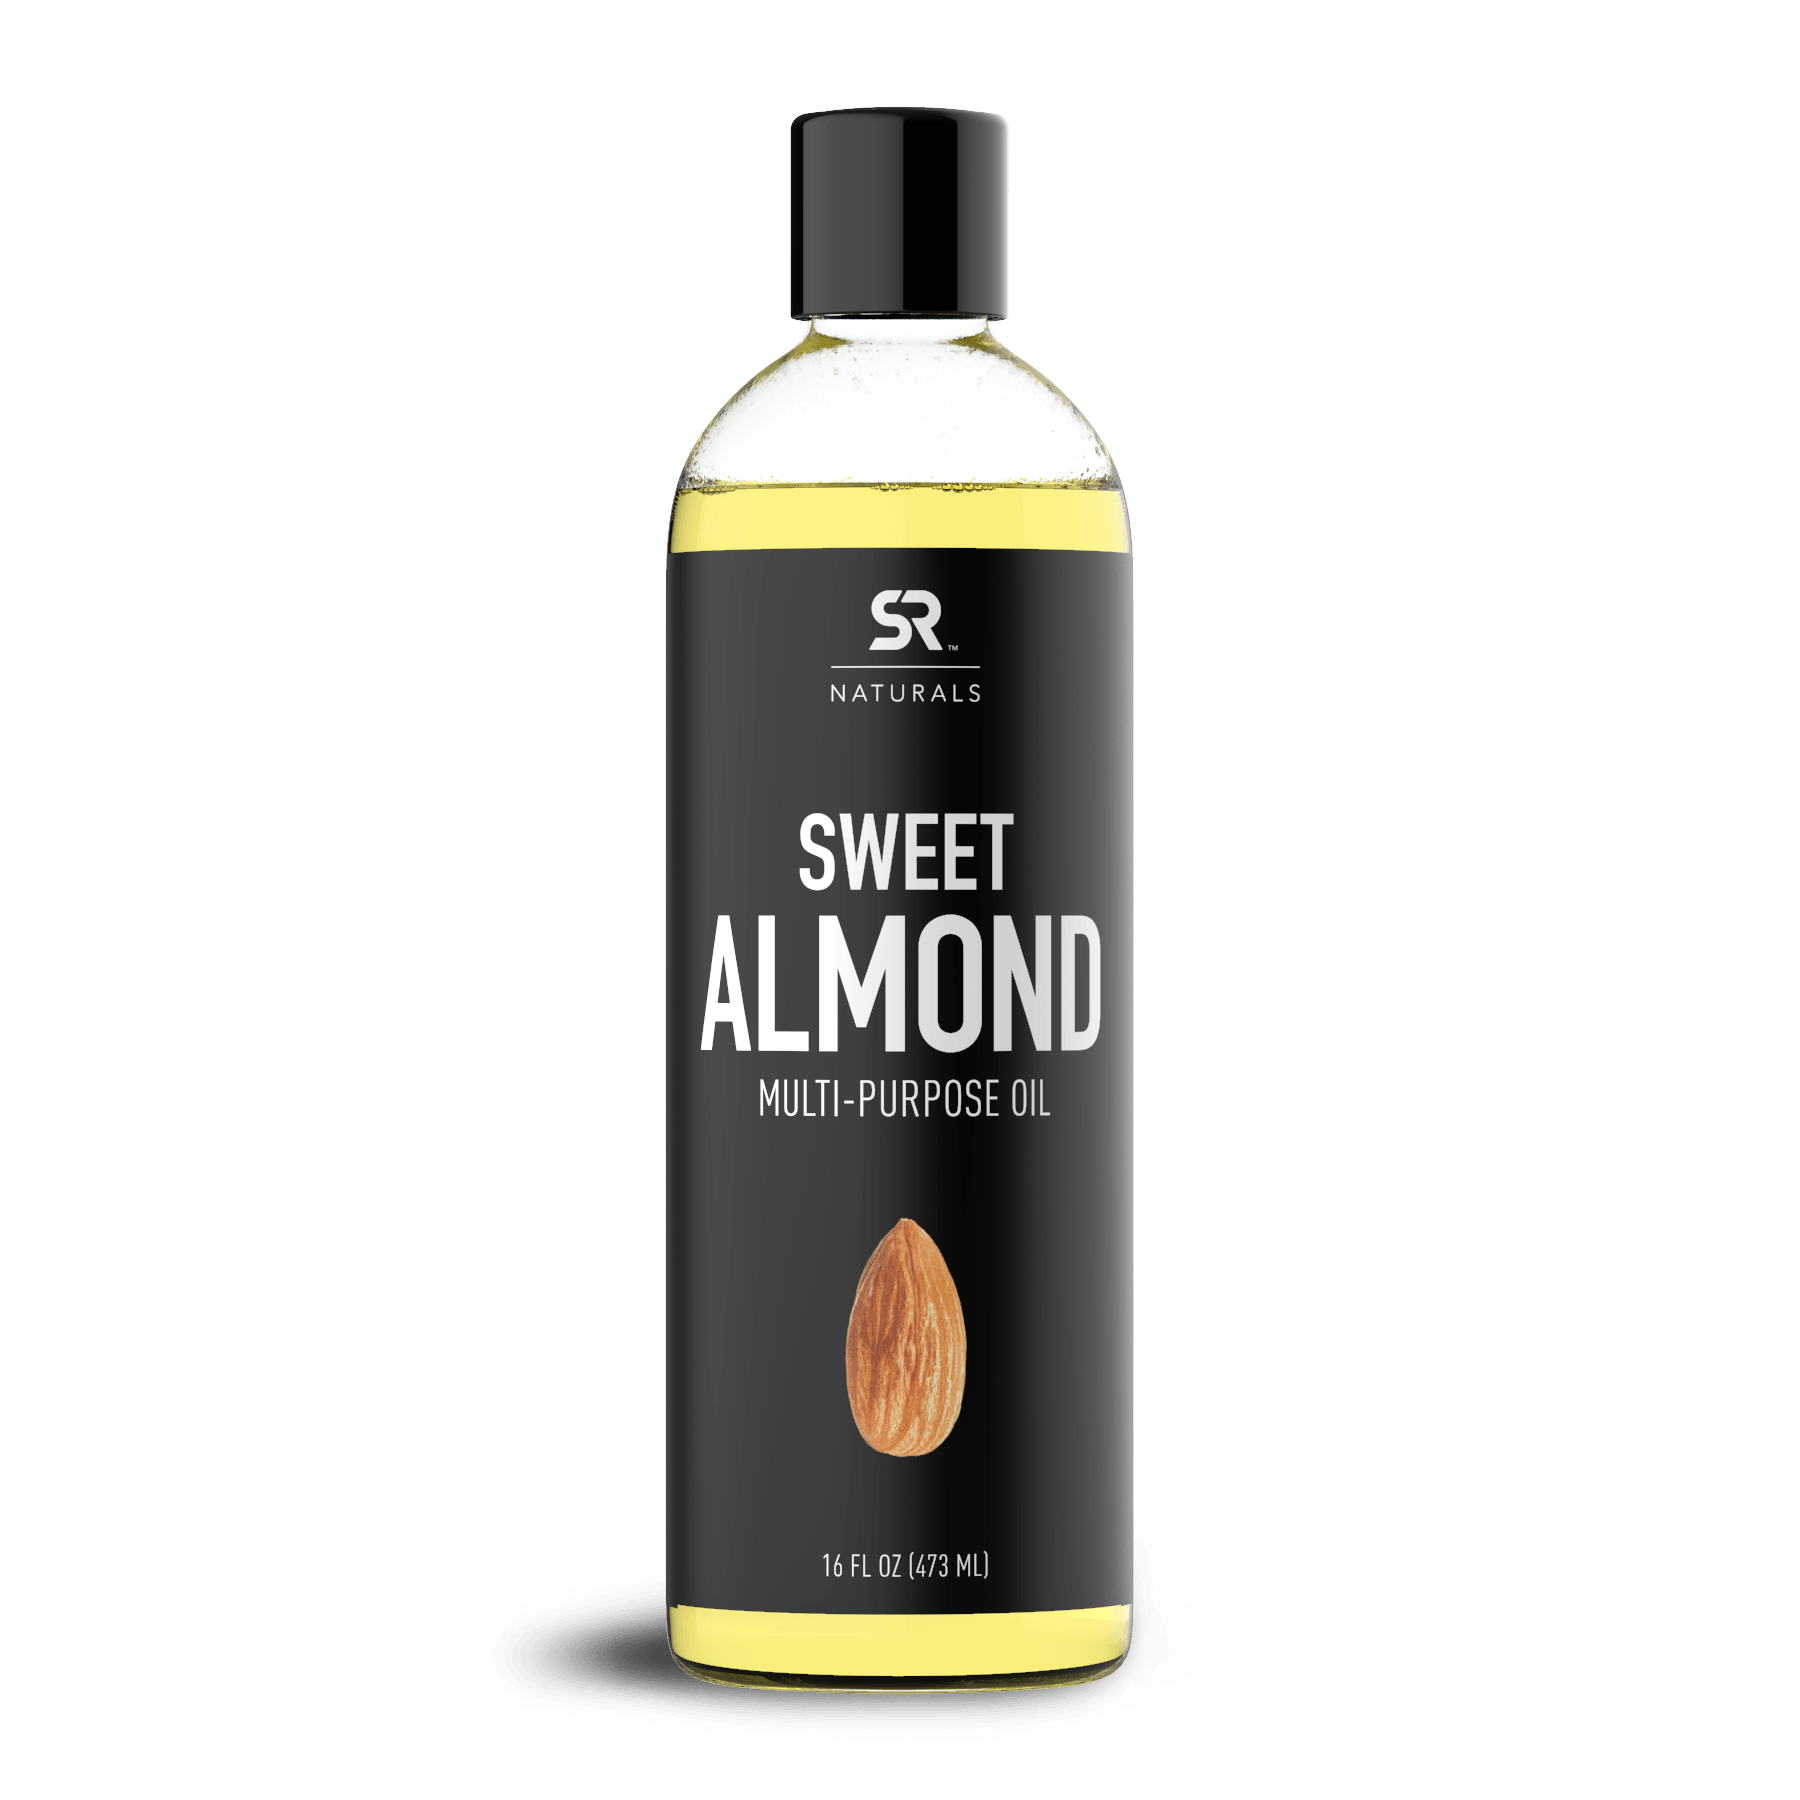 Sports Research SR Naturals® Sweet Almond Oil